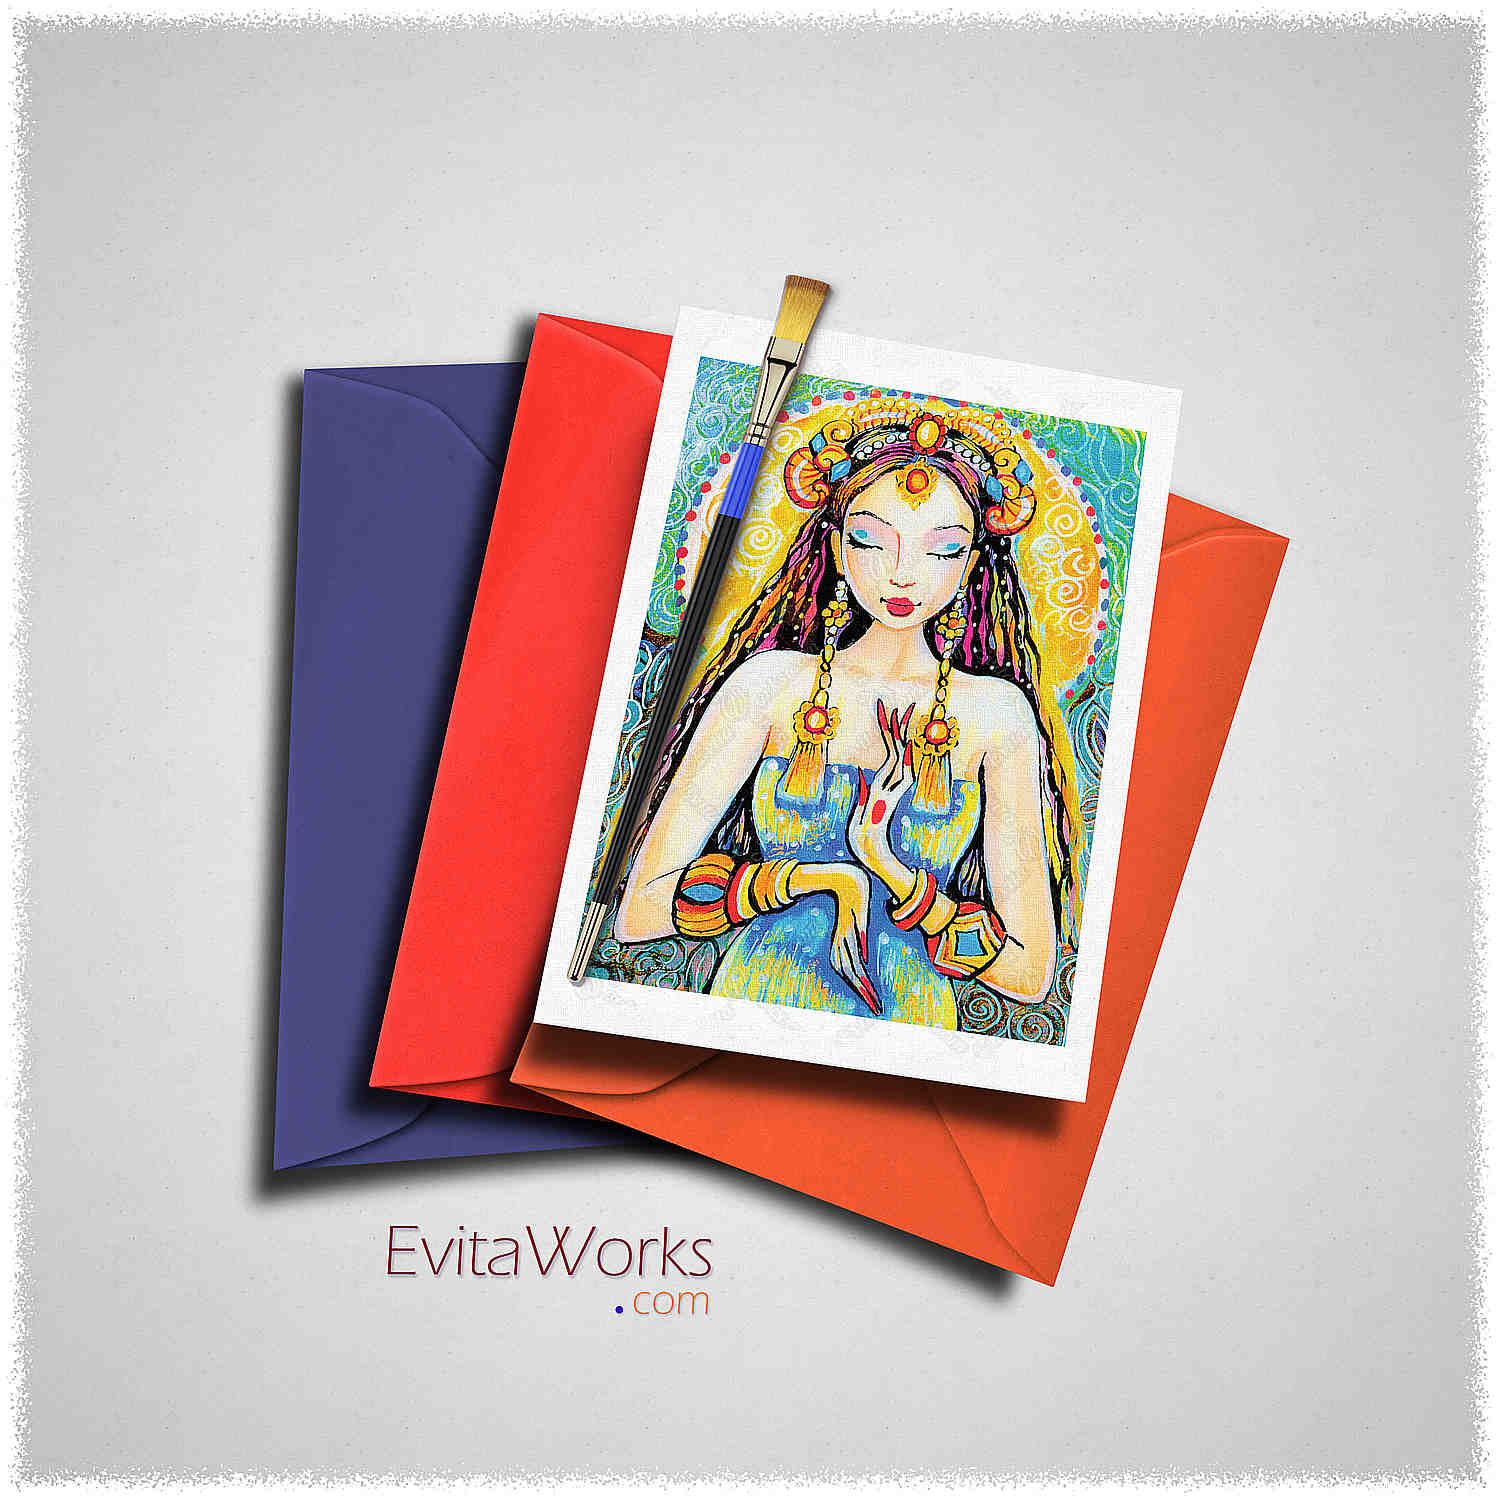 Hit to learn about "Quan Yin, Goddess of Mercy and Compassion" on cards